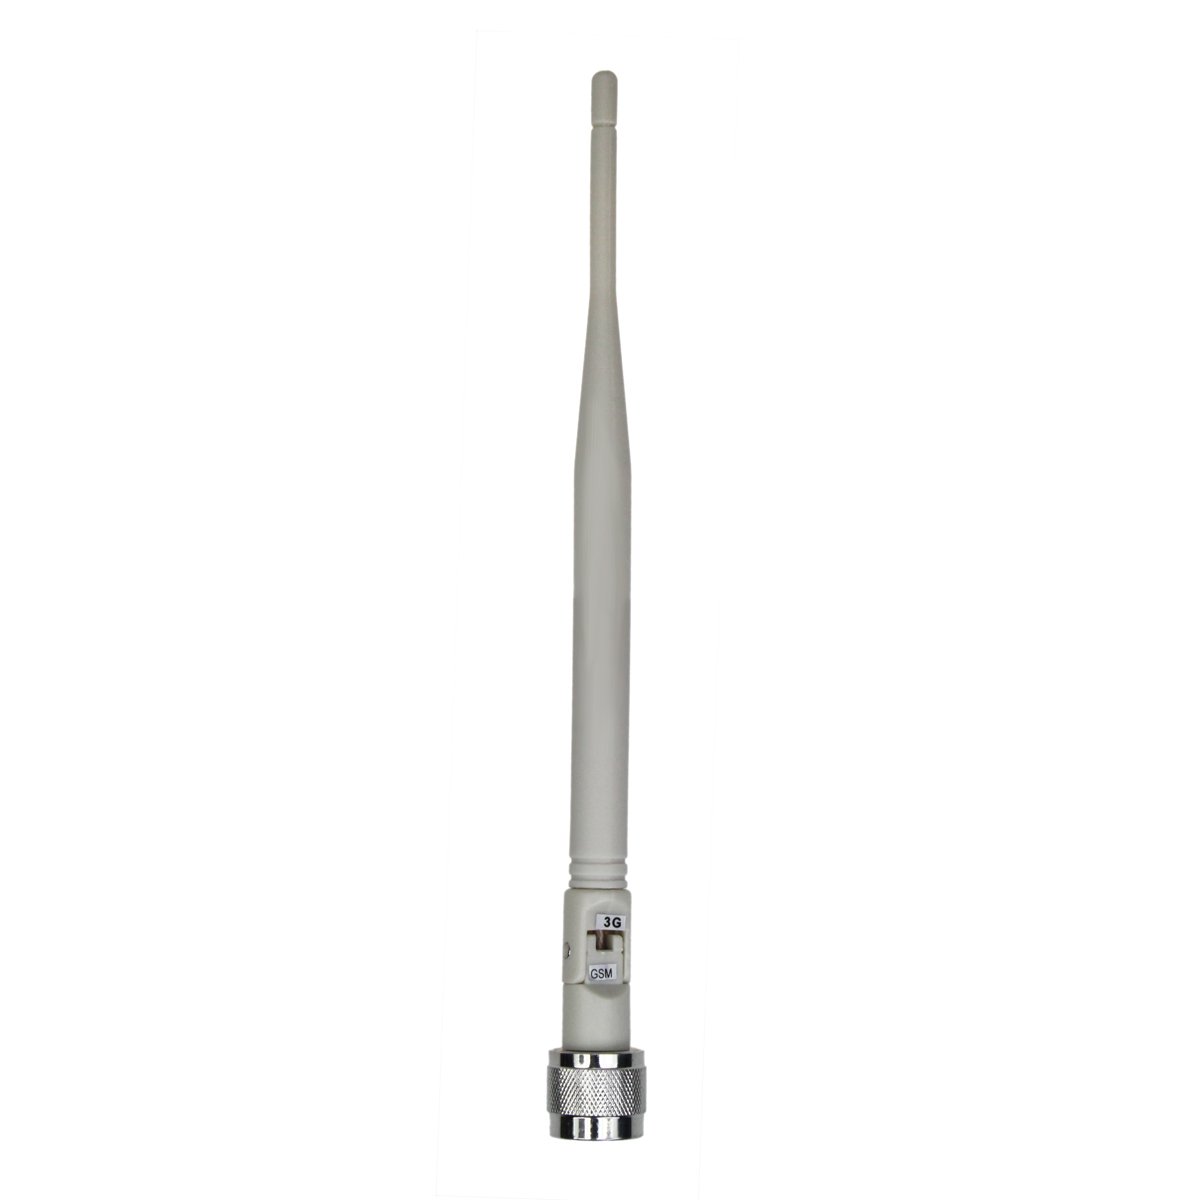 3G Mini Signal Booster All UK Networks whip